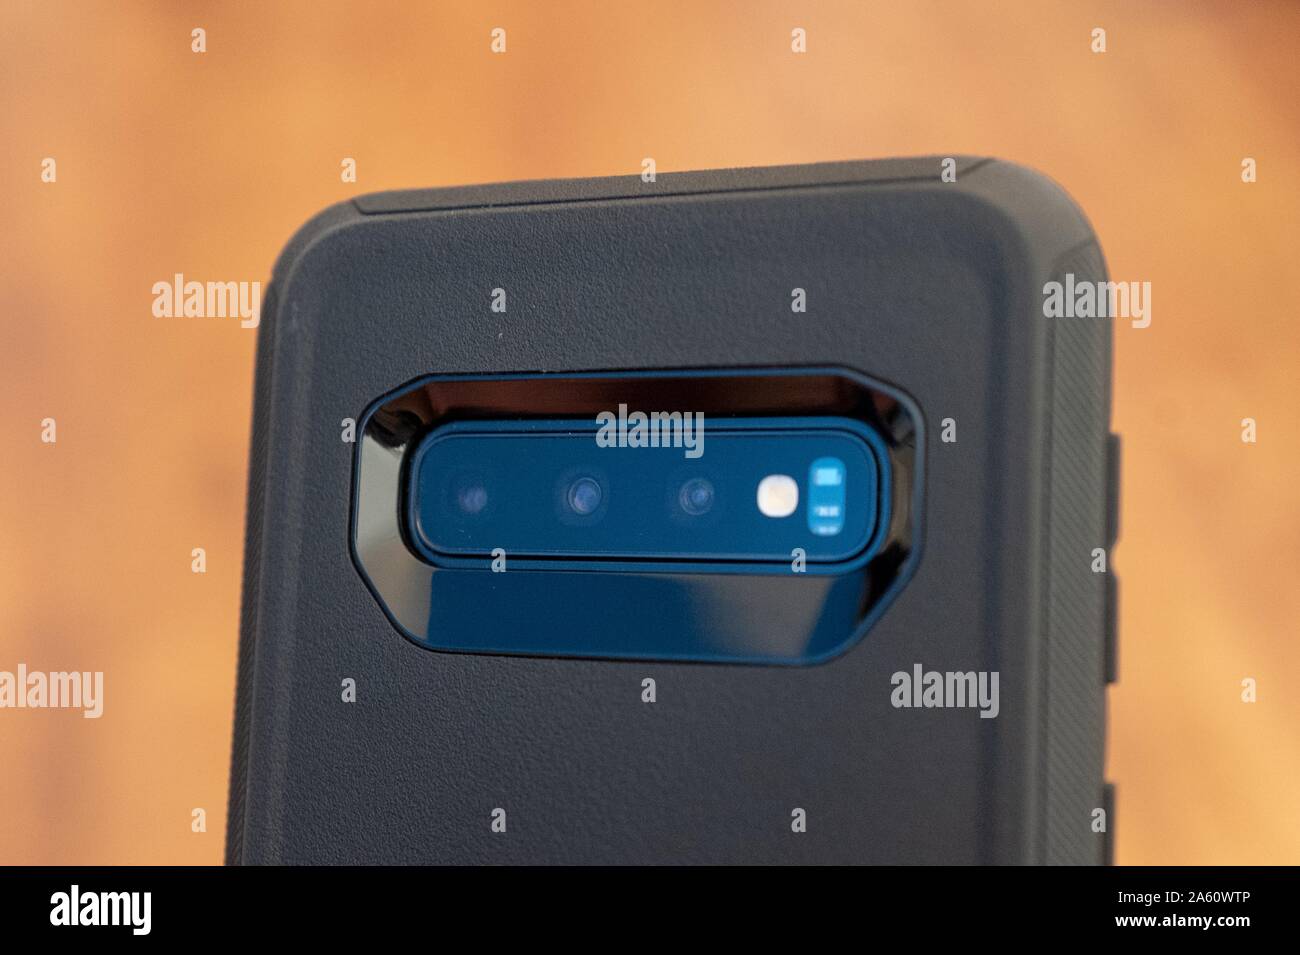 Close-up of the rear of a Samsung Galaxy S10 smart phone, showing multiple cameras, including a wide angle camera, close-up camera and standard camera, part of a trend towards integrating multiple cameras with differing focal lengths into cellphones, September 17, 2019. () Stock Photo